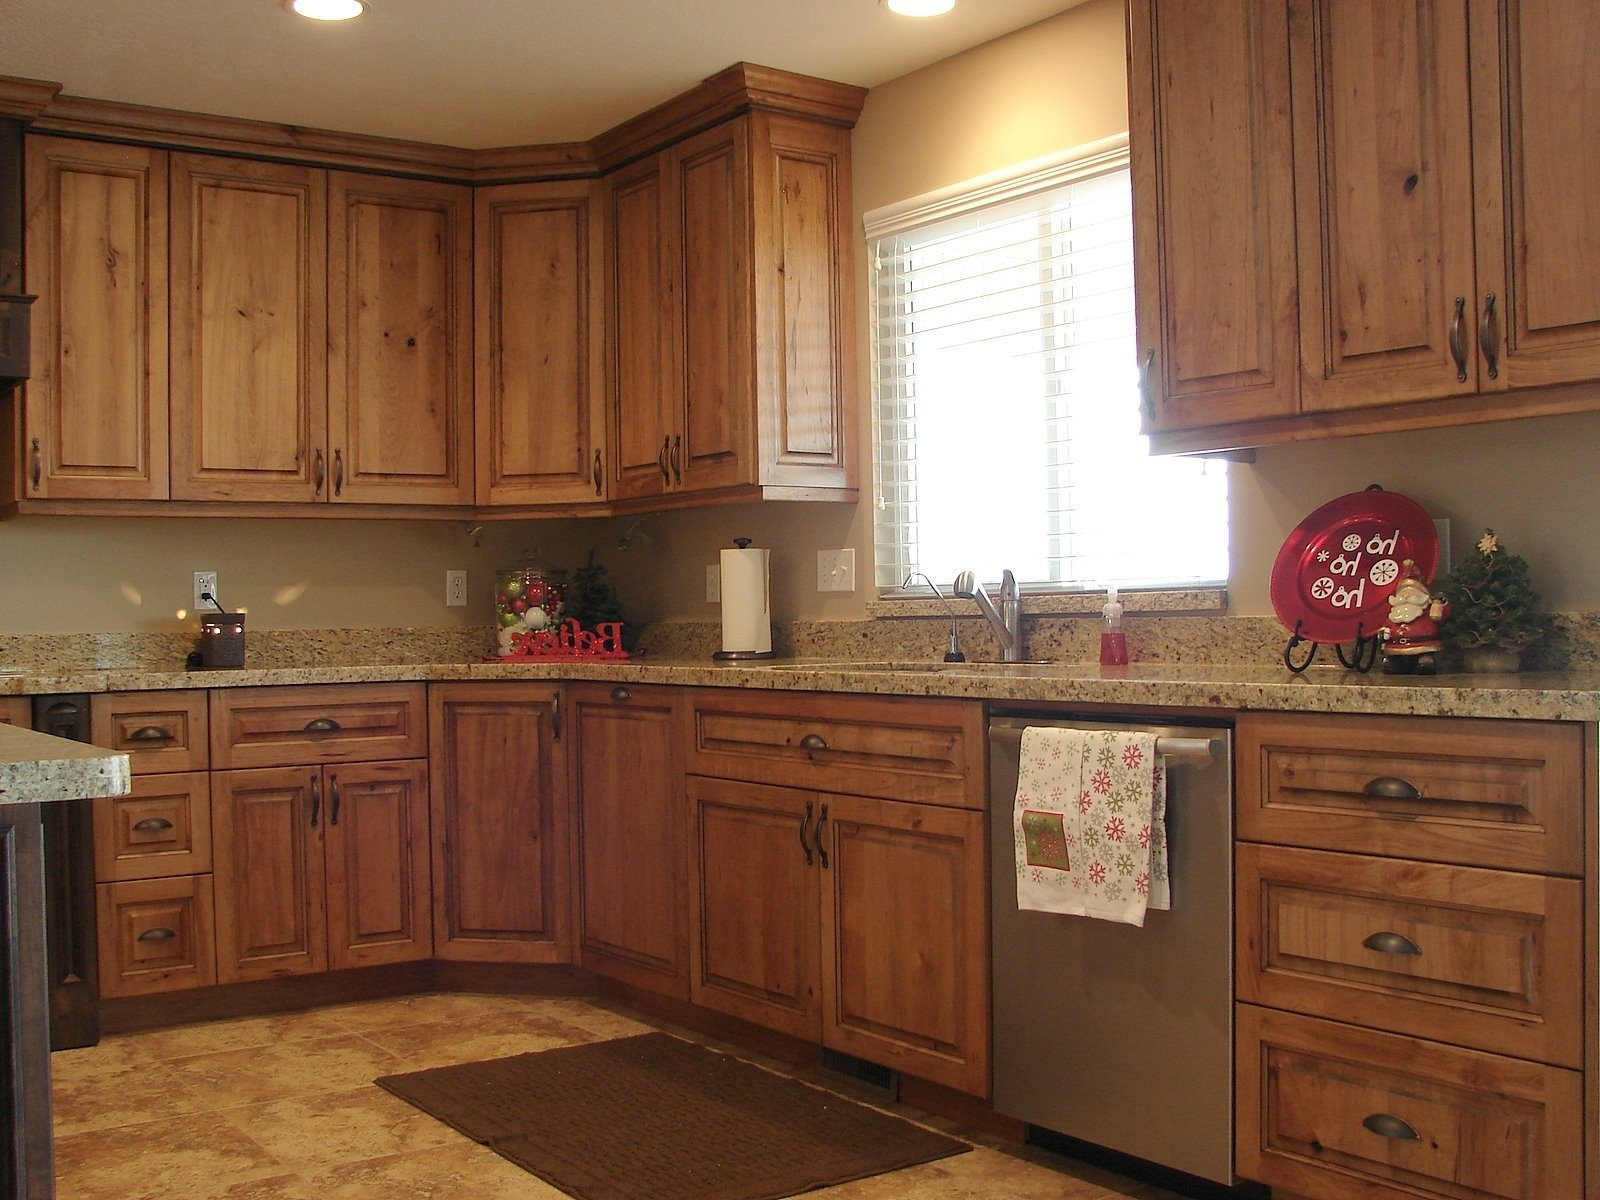 Lowes Kitchen Wall Cabinets
 Kitchen Schuler Cabinets Reviews For Custom Kitchen